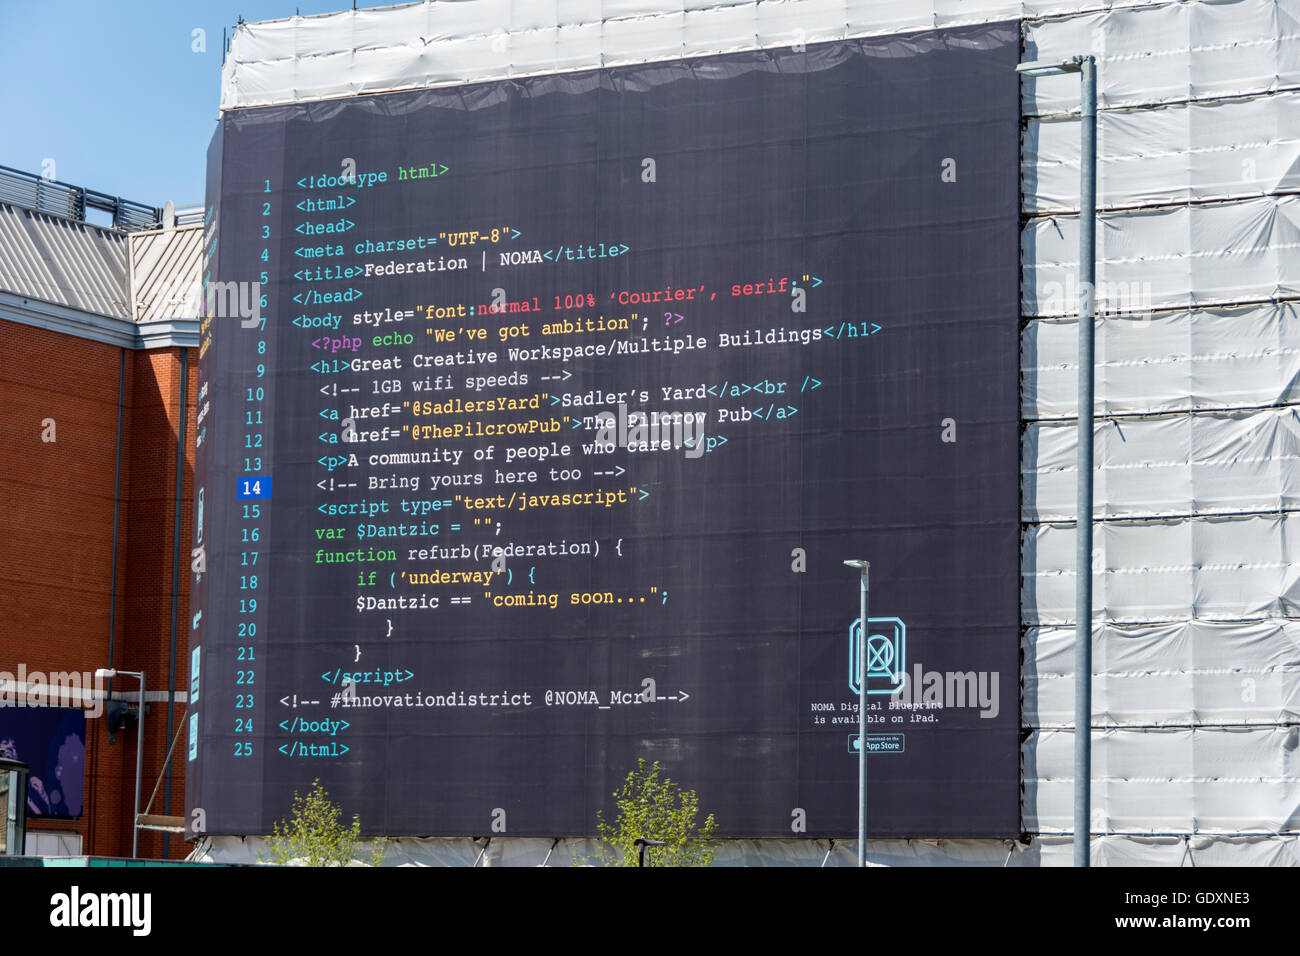 A banner in the form of HTML code on scaffolding on the Hanover building, Dantzic Street, Manchester, England, UK Stock Photo